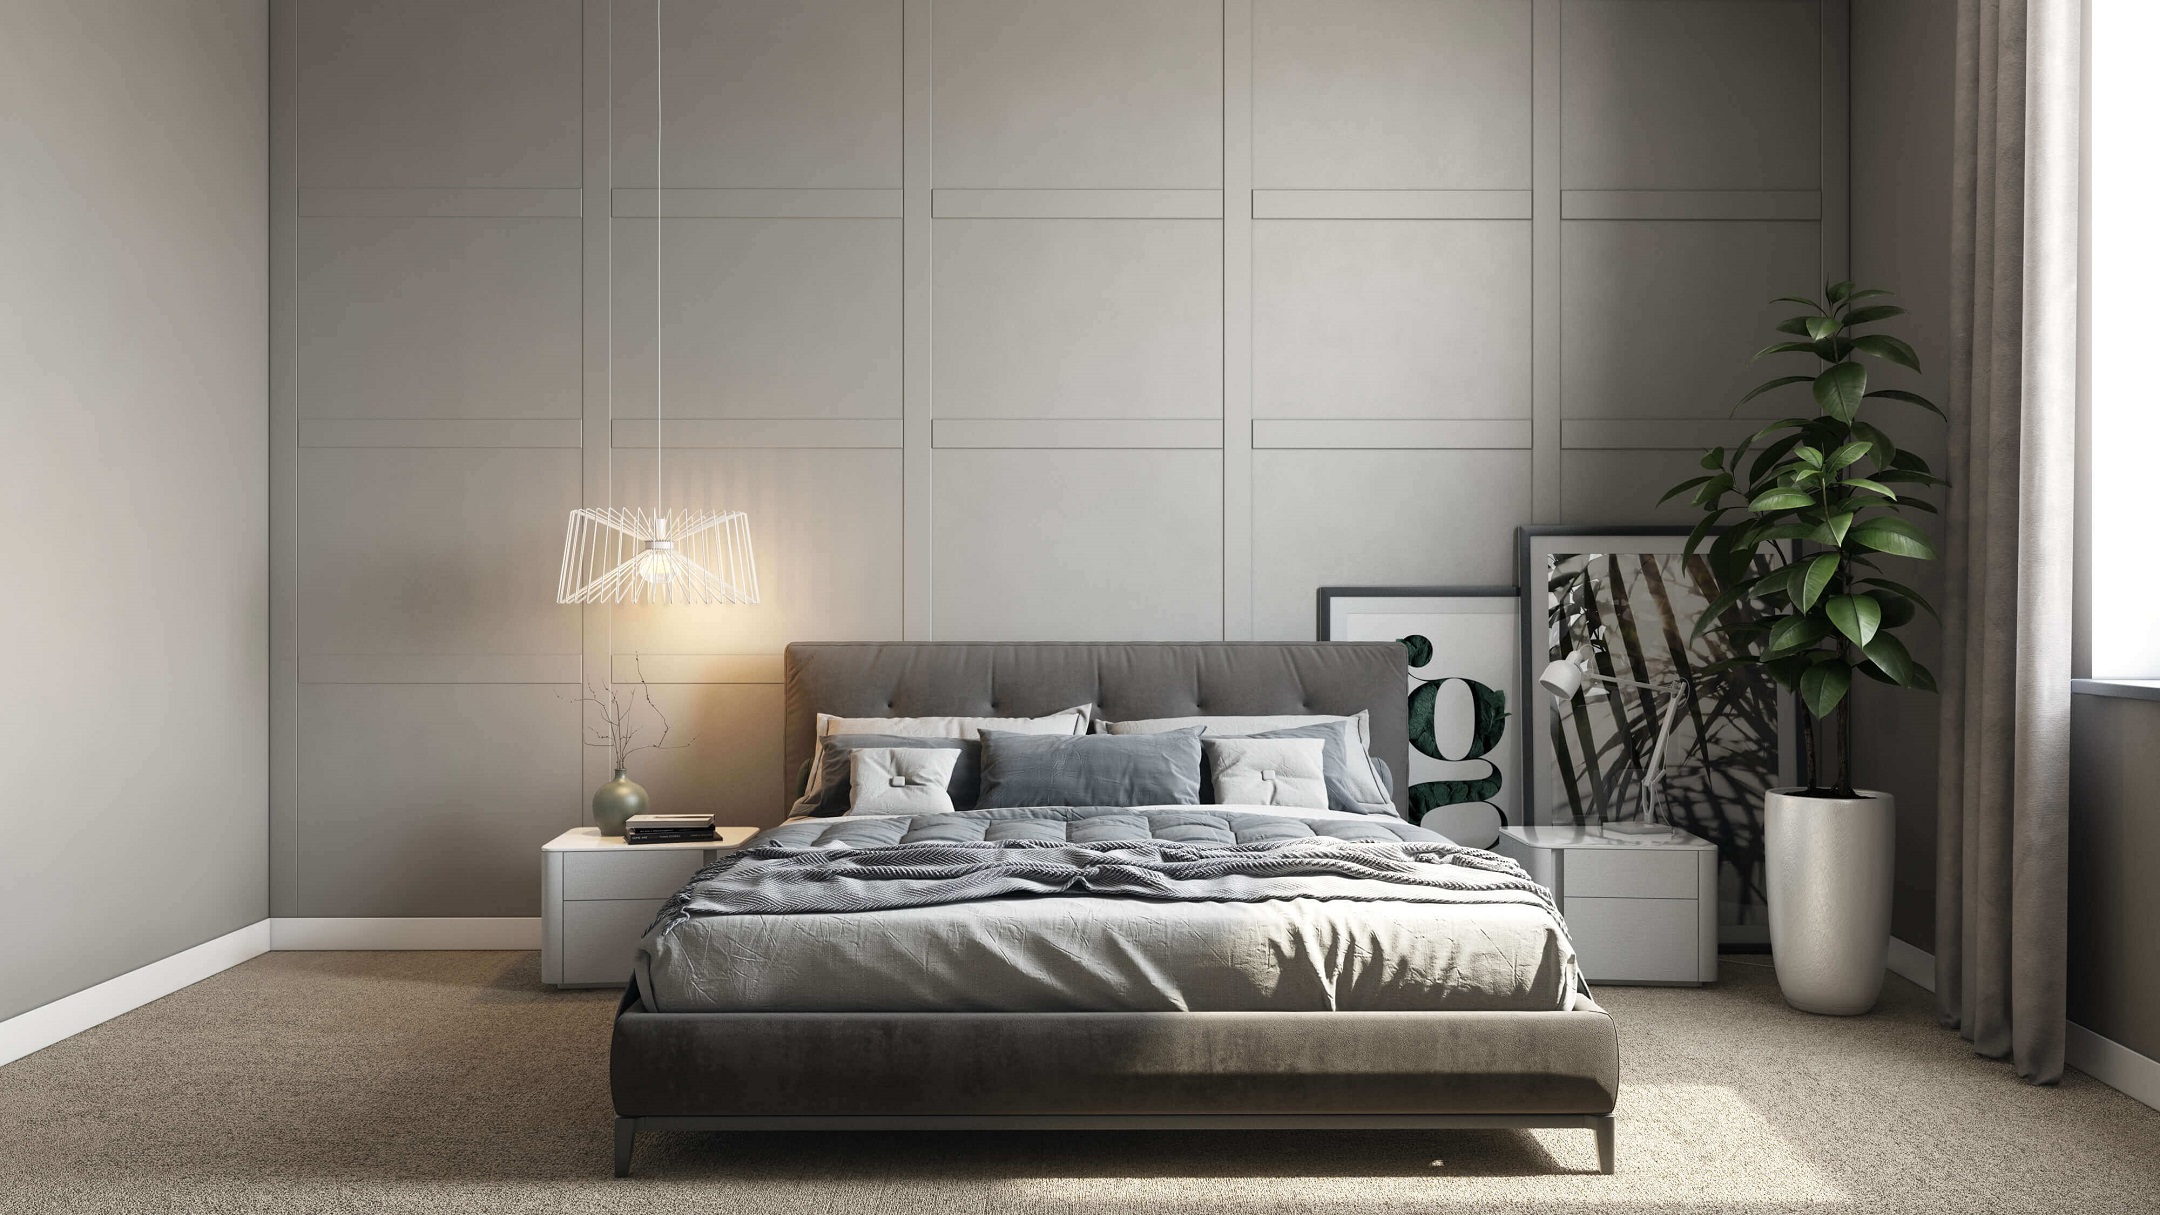 A CG Image of a Bedroom Designed in Minimalist Style